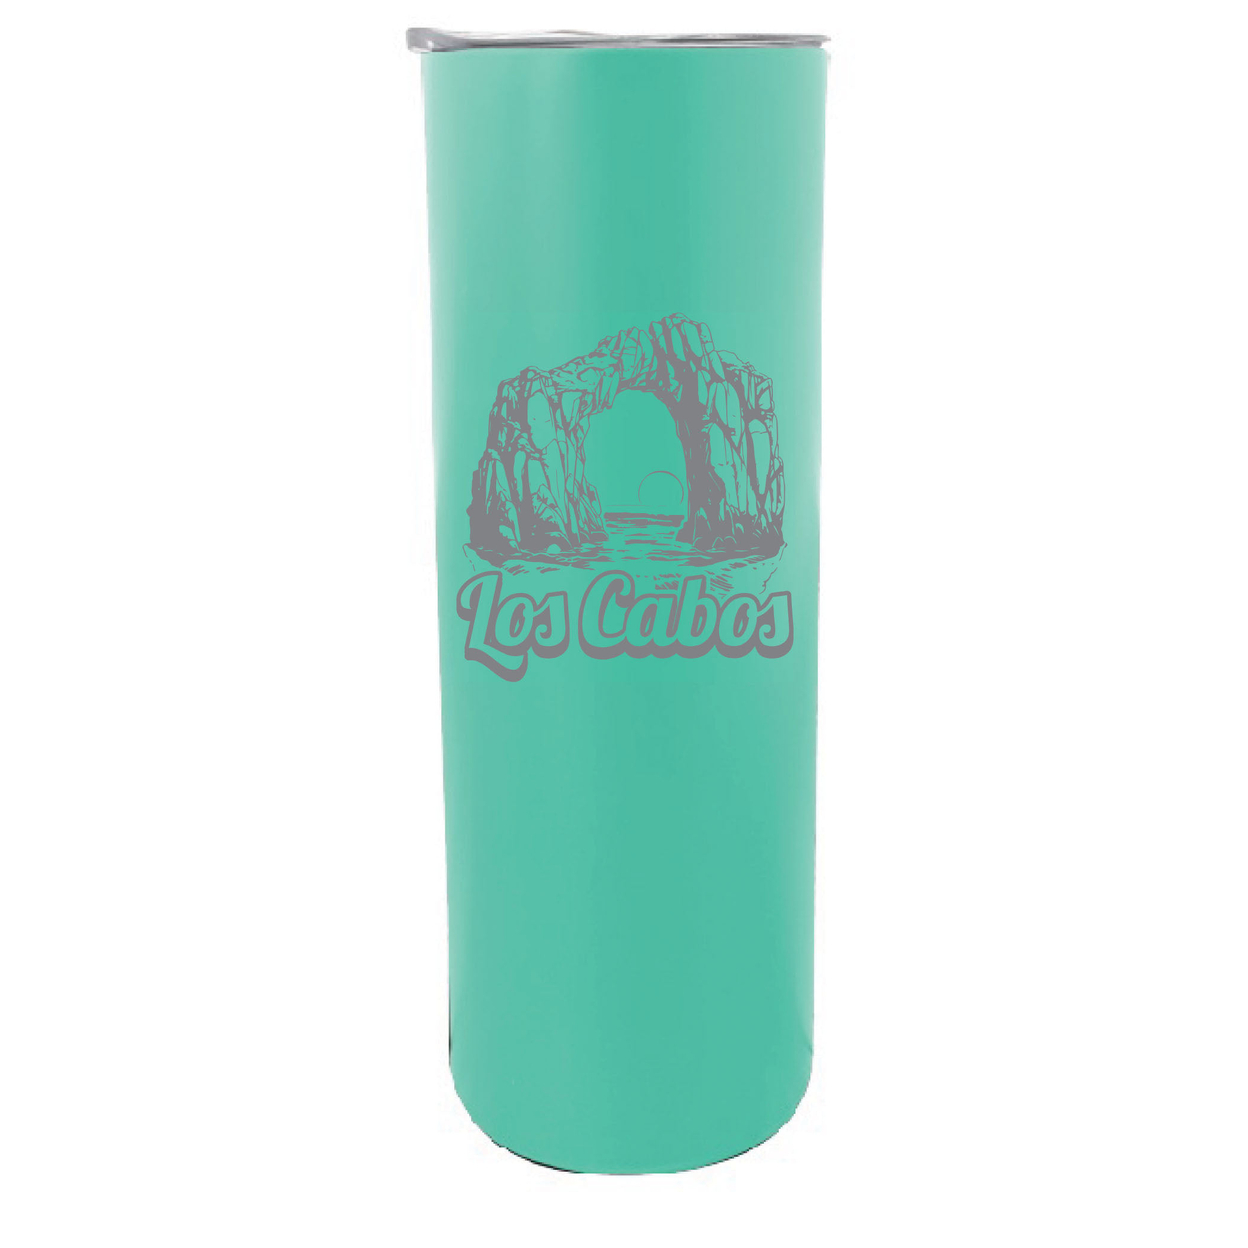 Los Cabos Mexico Souvenir 20 Oz Engraved Insulated Stainless Steel Skinny Tumbler - Black,,4-Pack